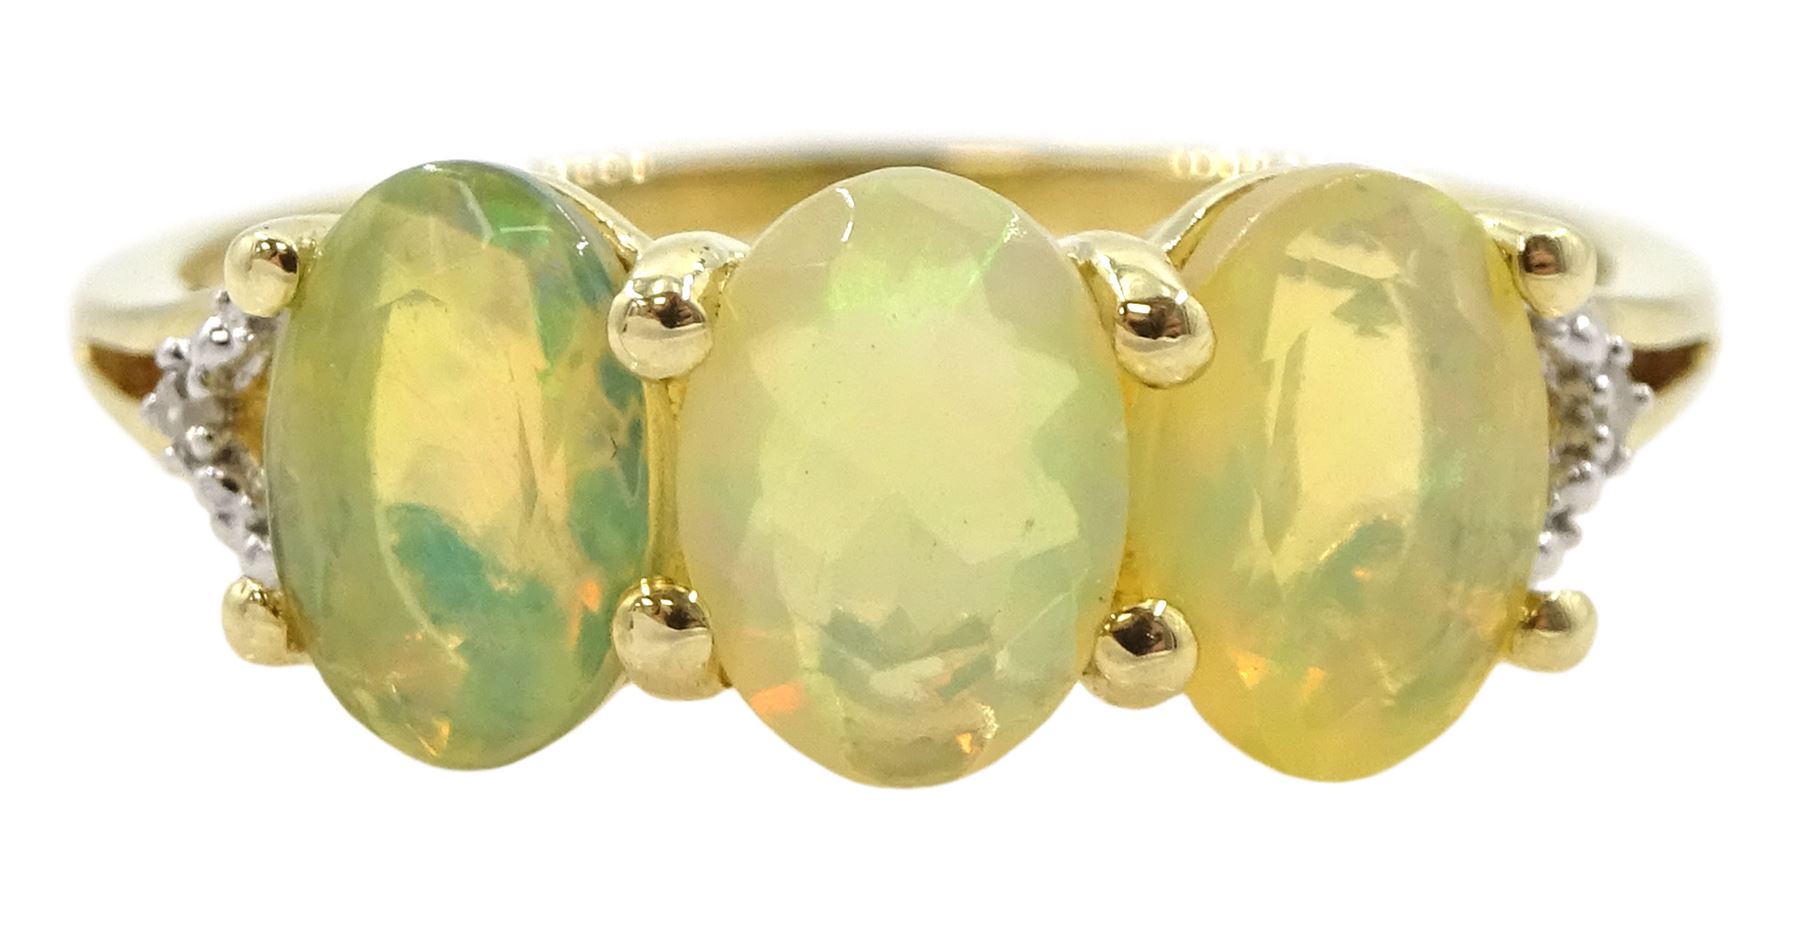 9ct gold three stone opal ring - Image 5 of 5